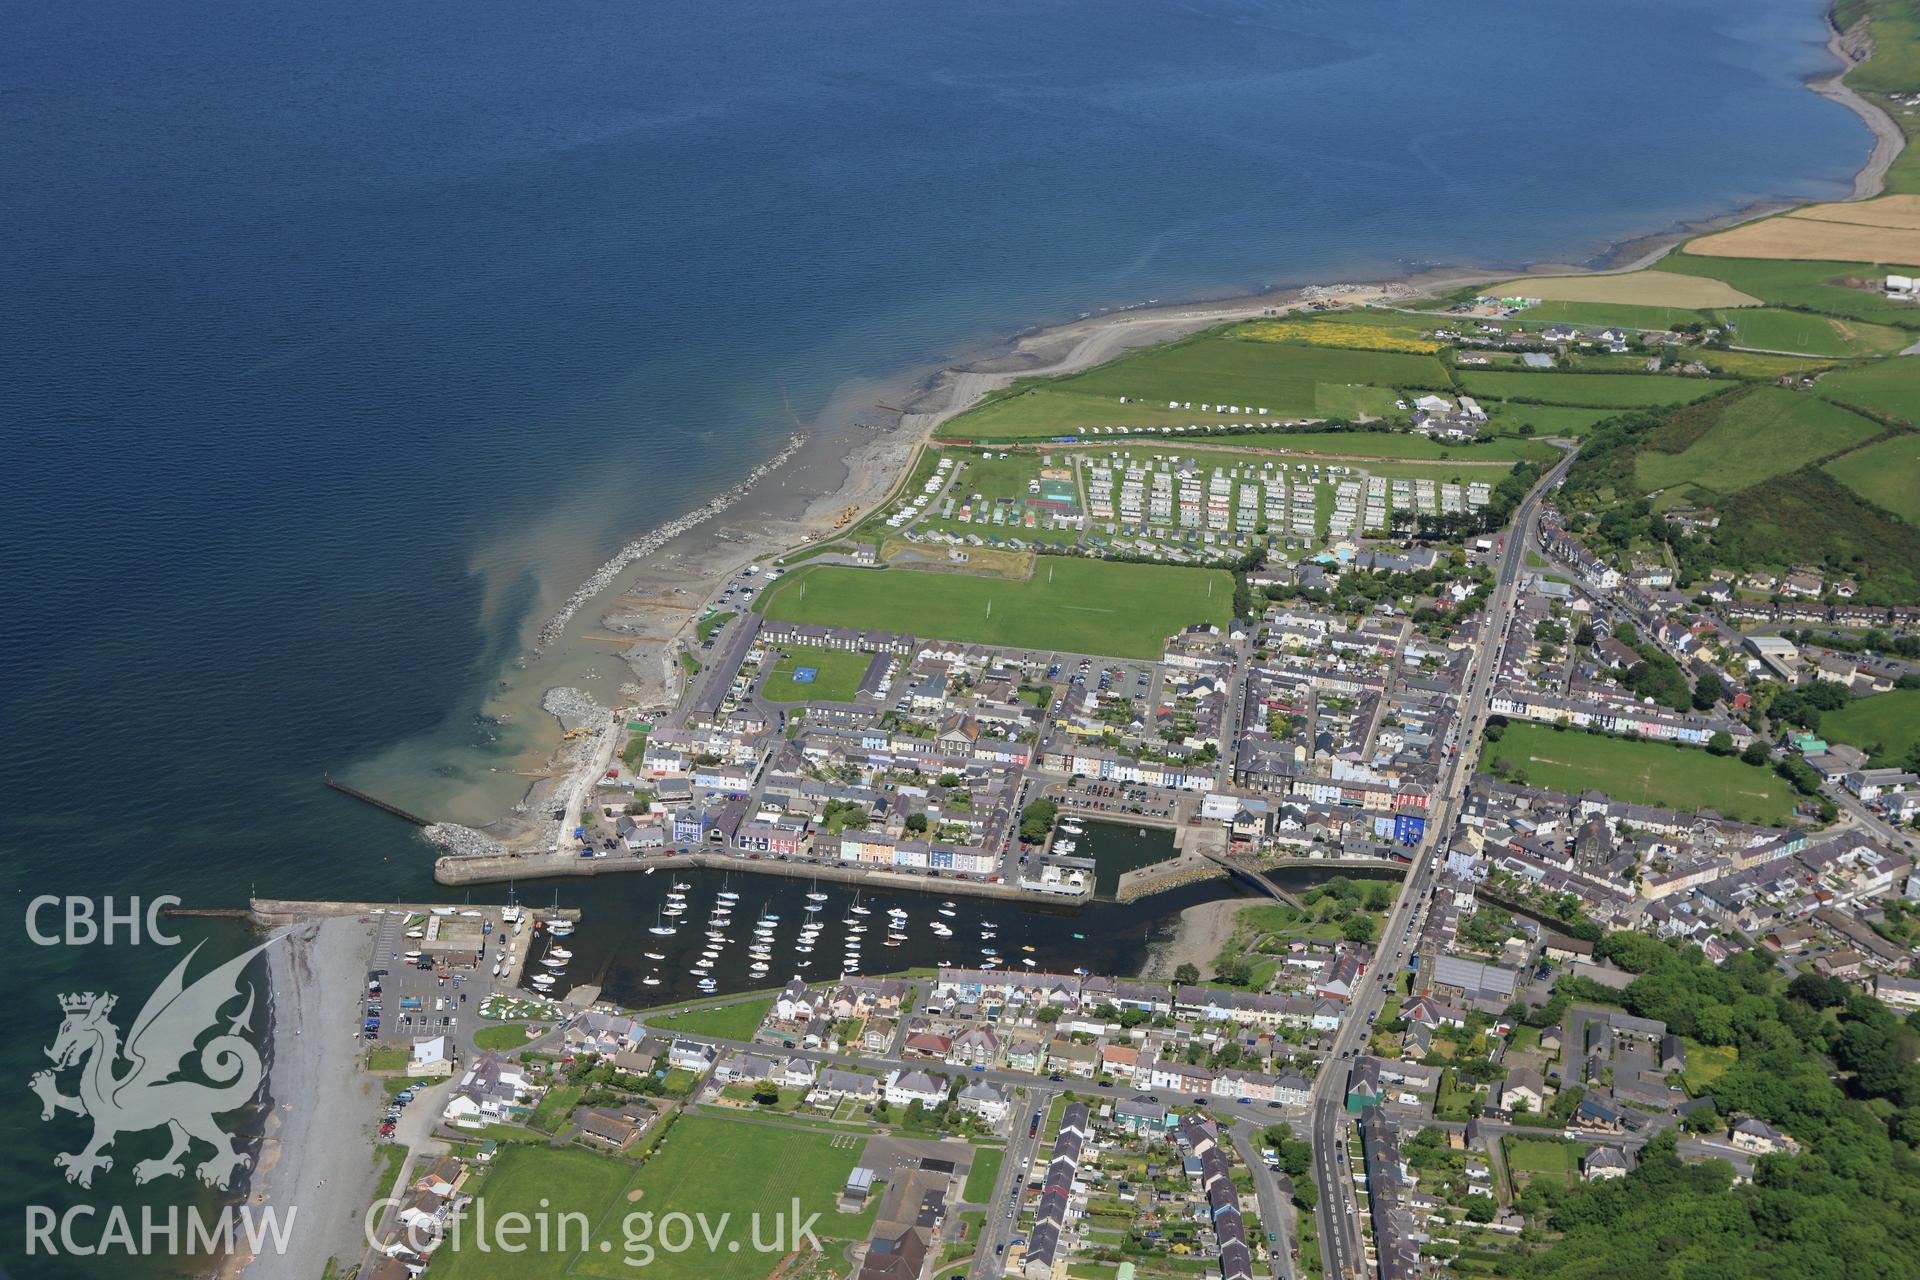 RCAHMW colour oblique aerial photograph of Aberaeron. Taken on 01 June 2009 by Toby Driver